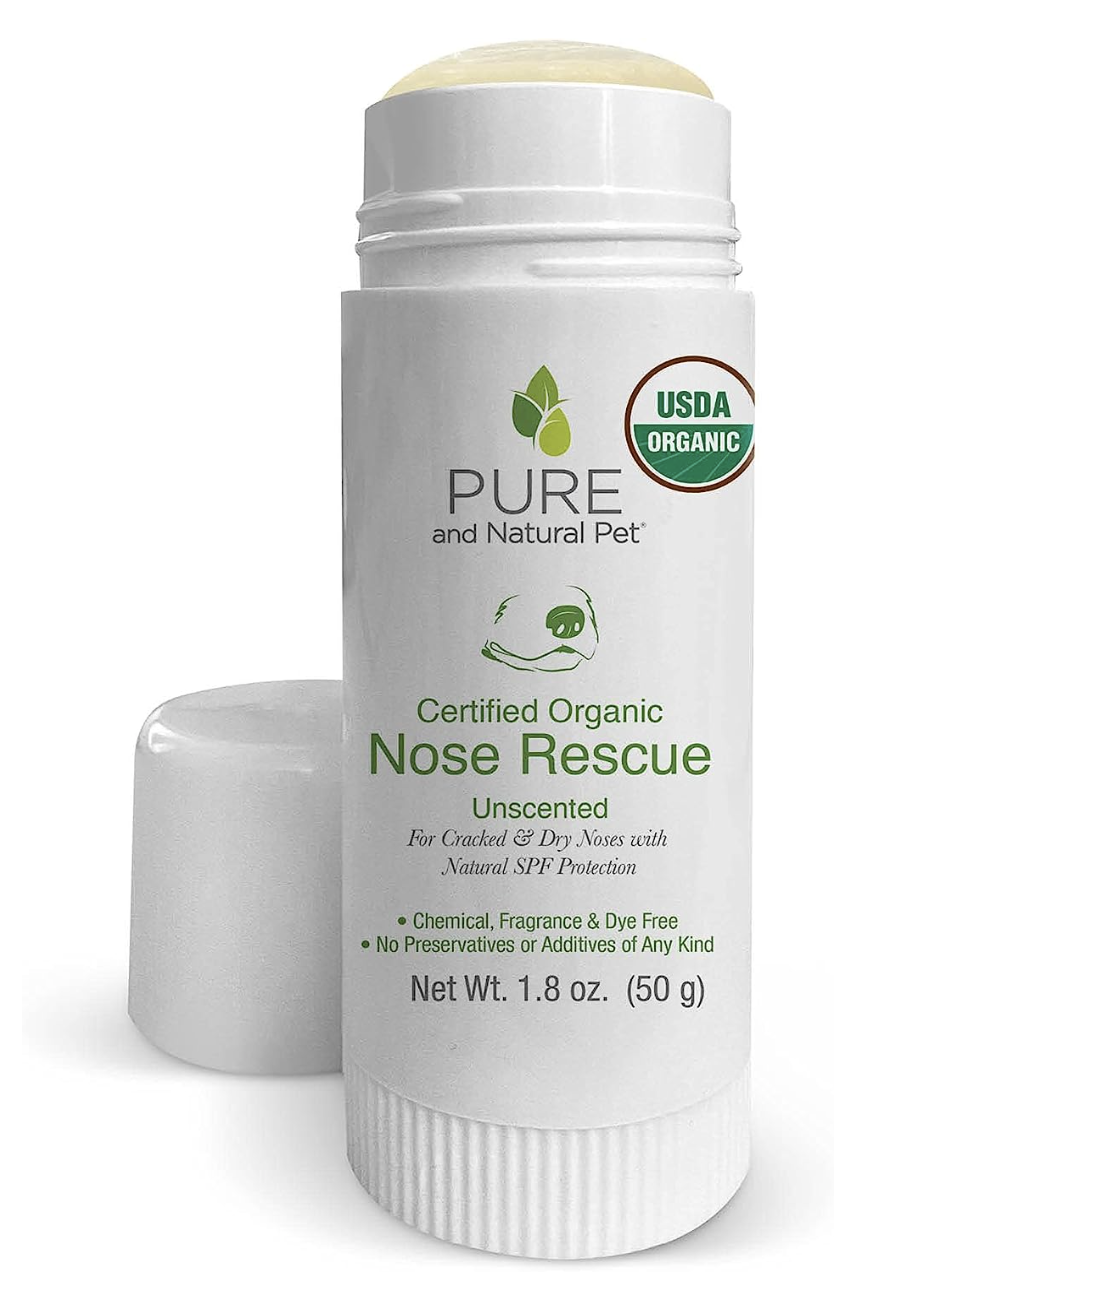 6. Pure and Natural Pet Organic Nose Rescue